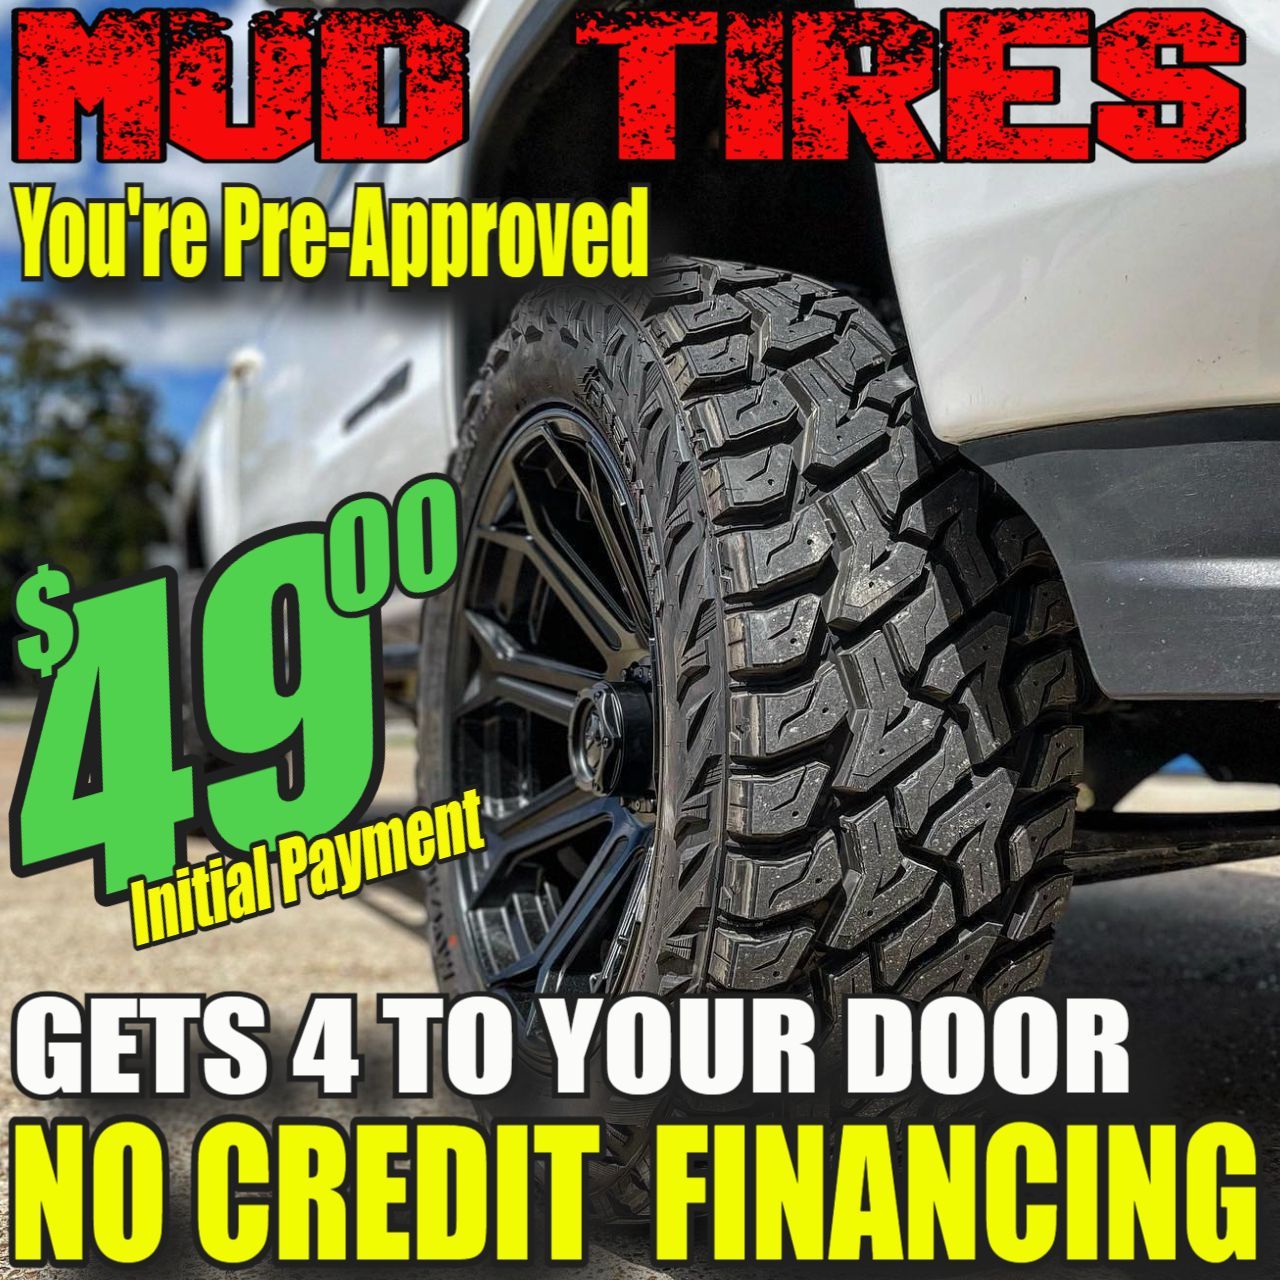 an ad for mud tires that says you 're pre-approved